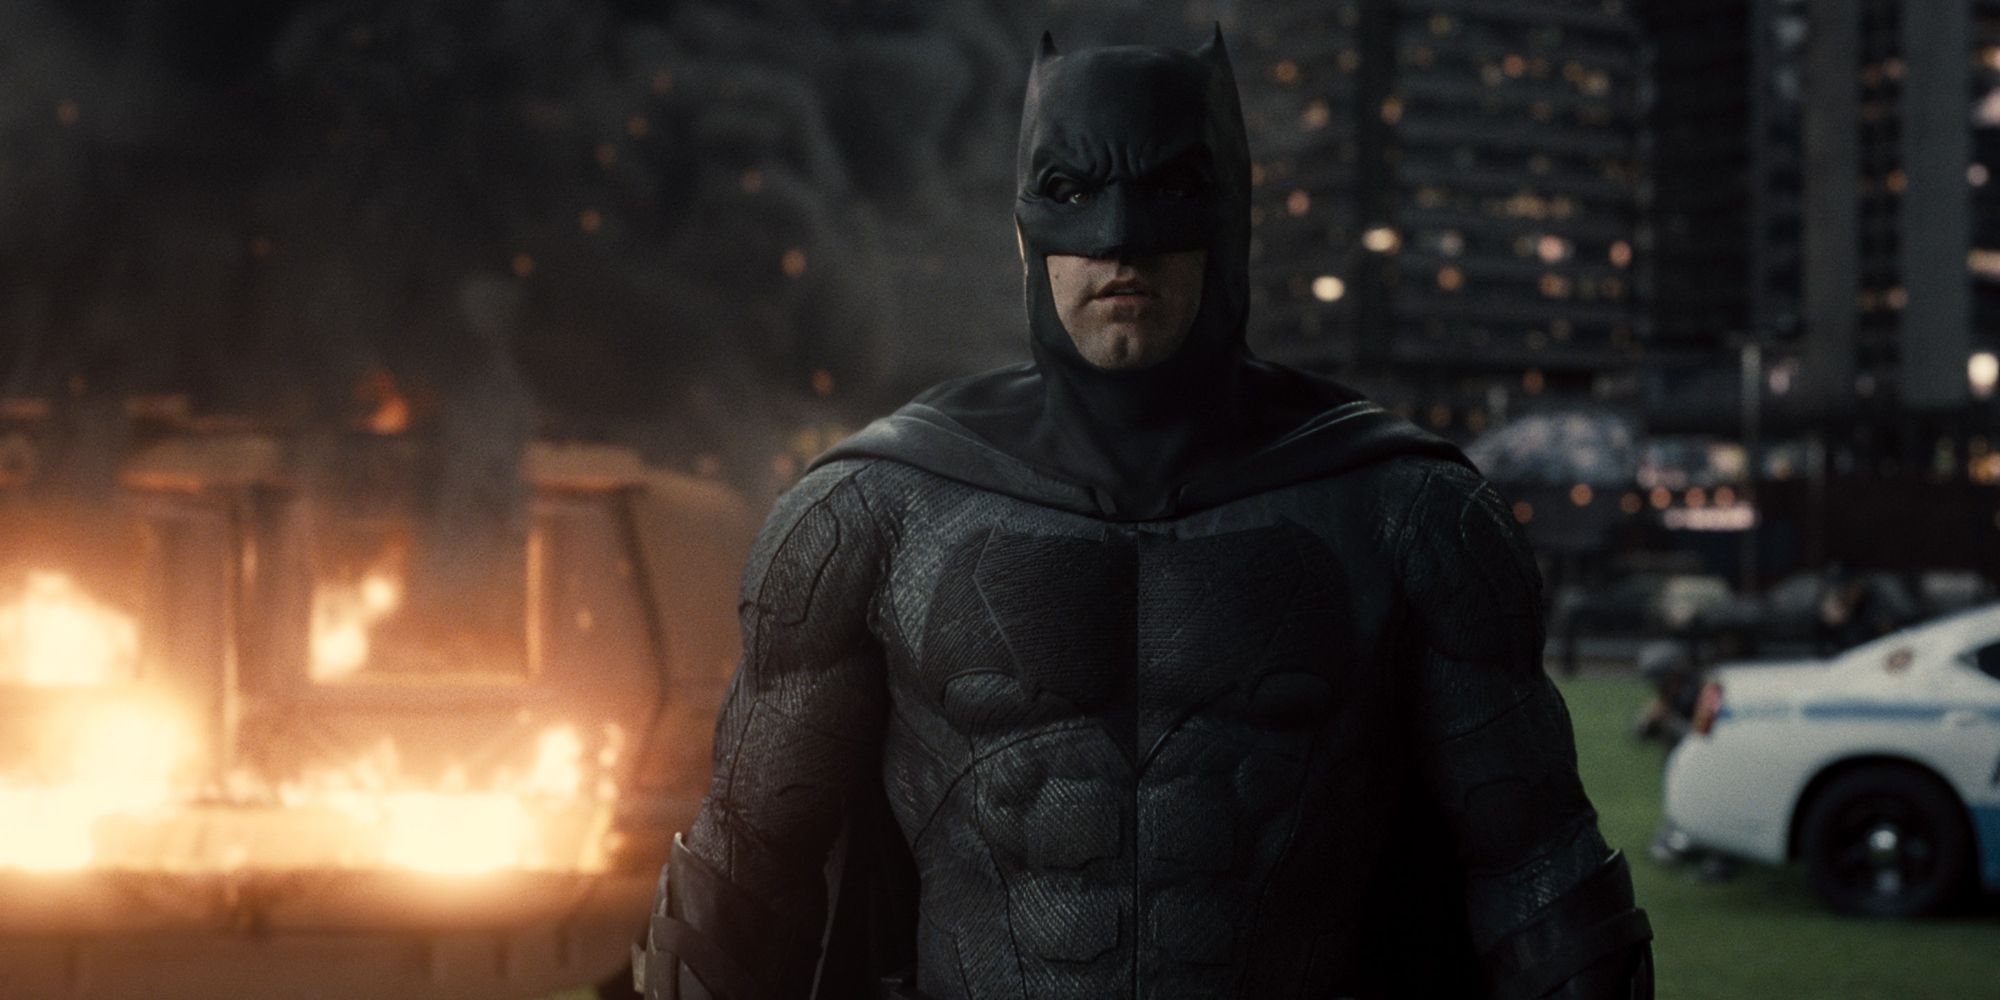 Ben Affleck's Batman approaching a rogue Superman in Zack Snyder's Justice League